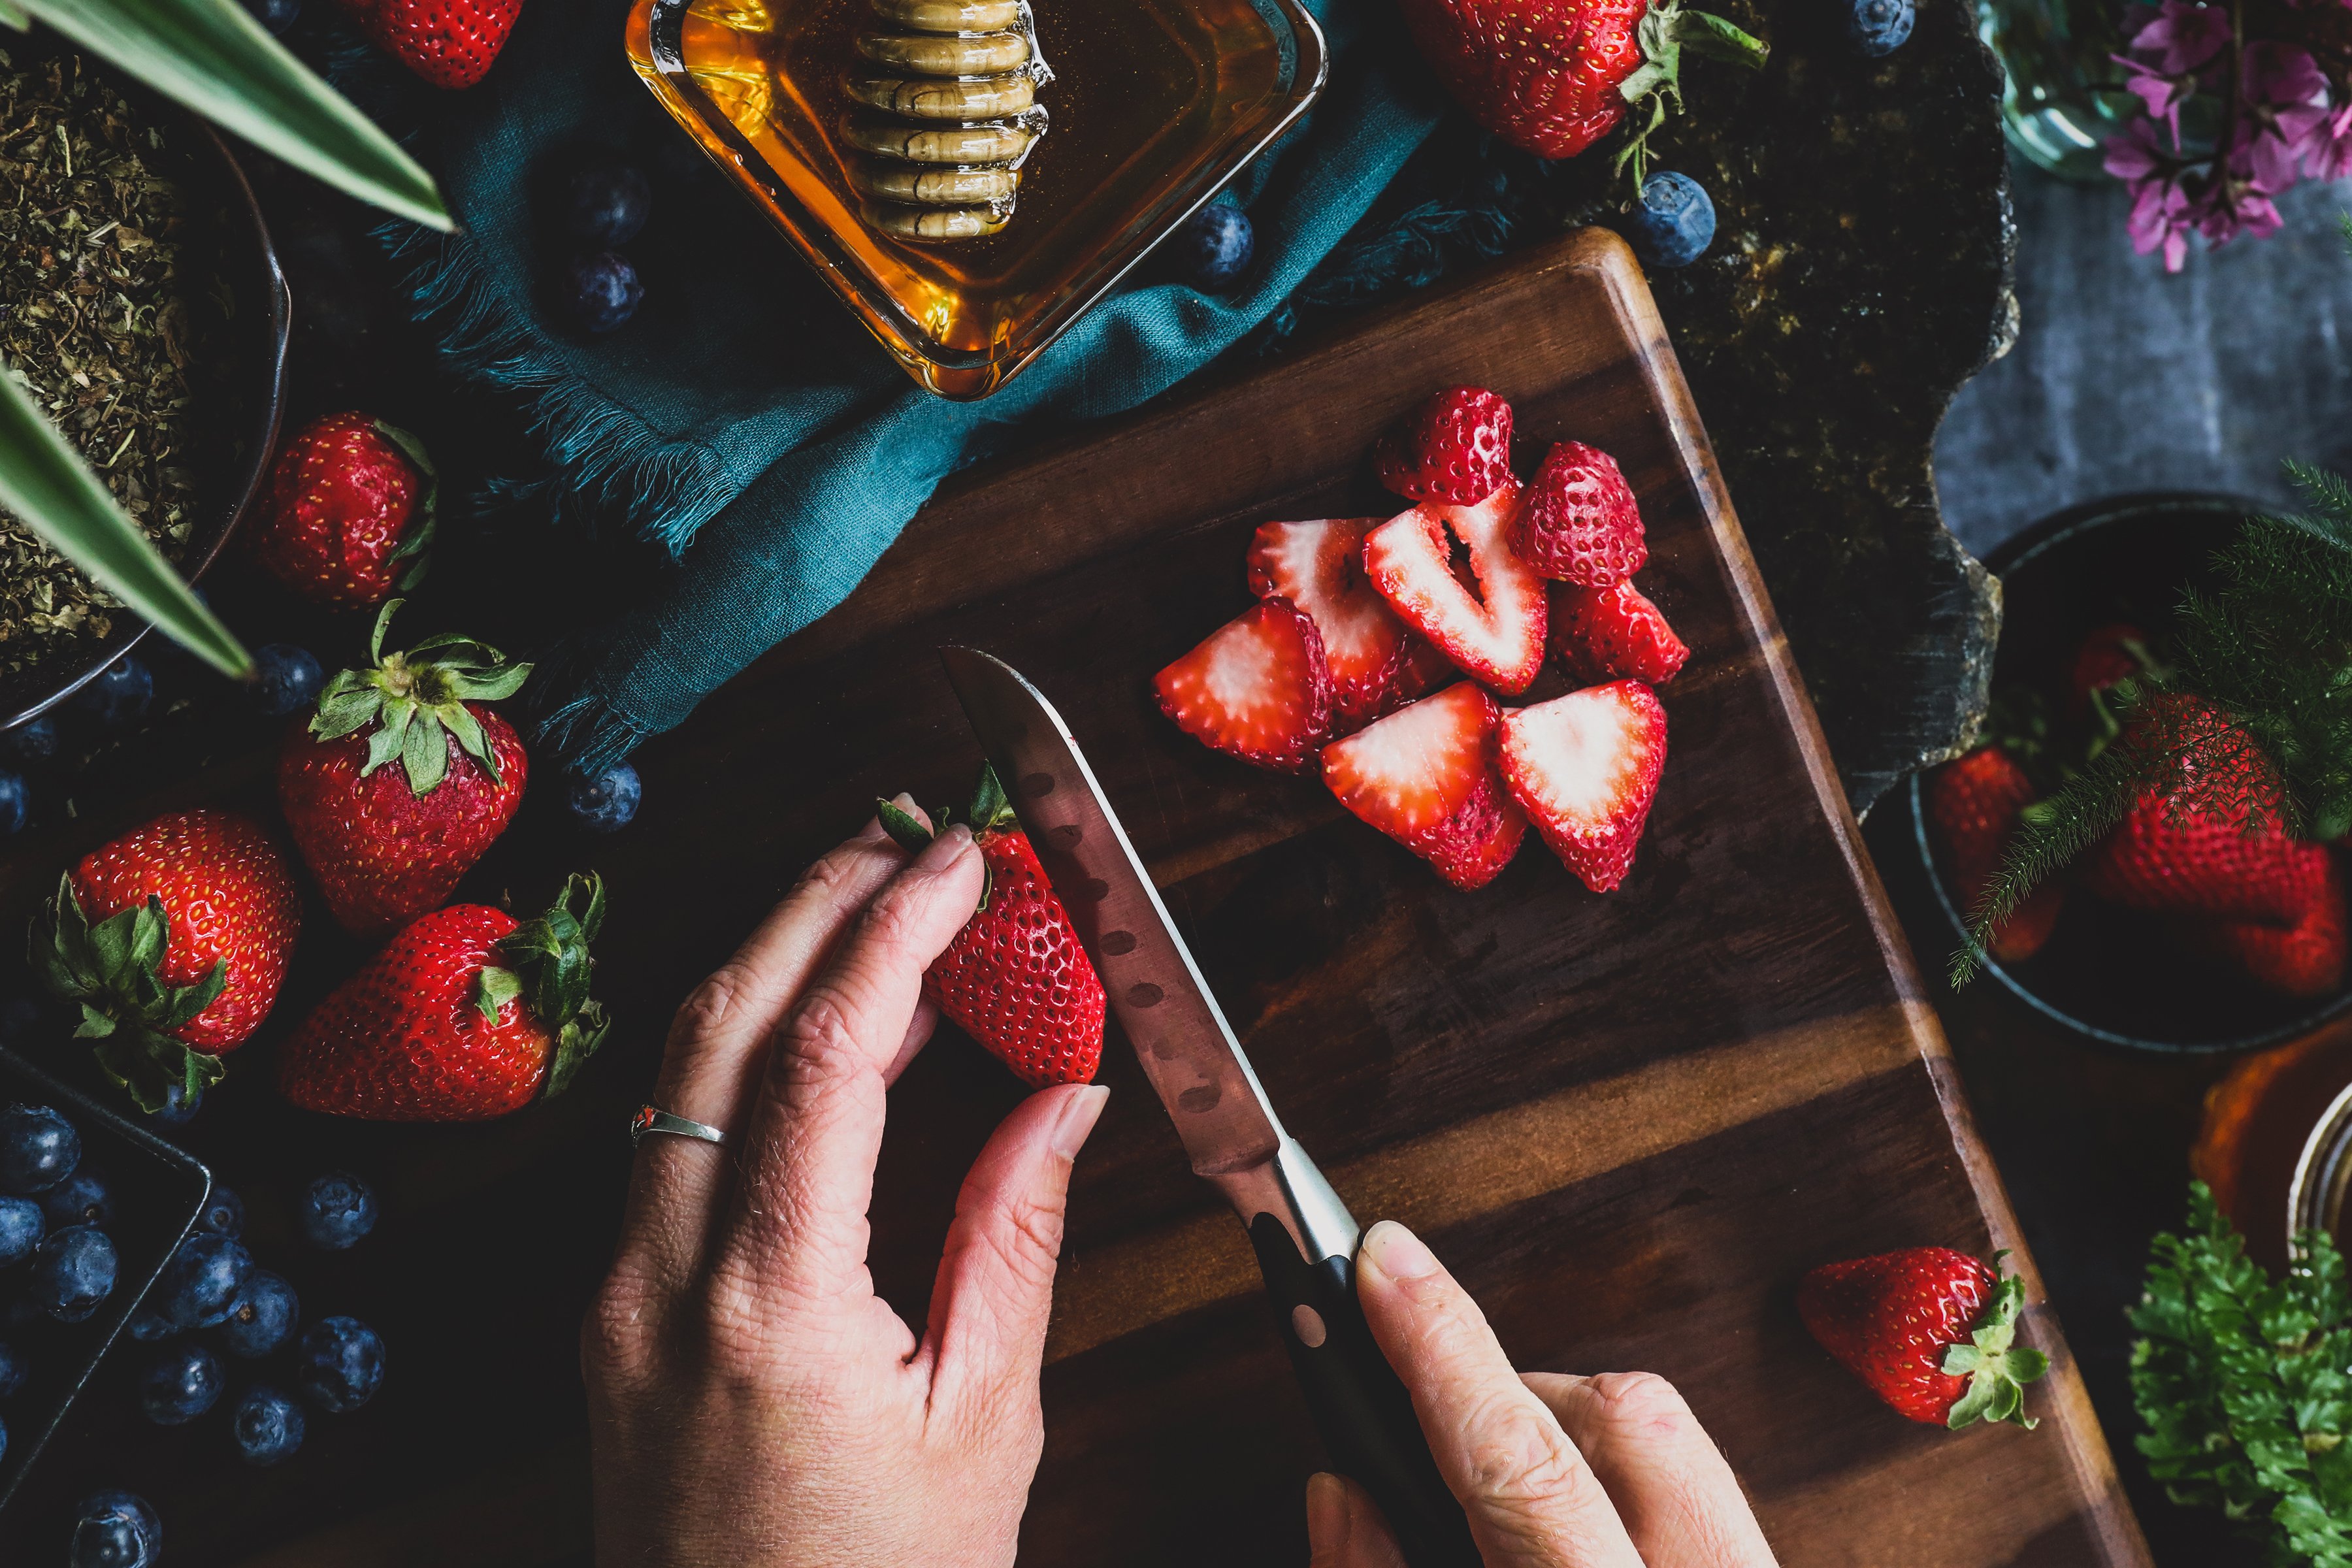 Hands cutting fresh strawberries, surrounded by blueberries and other fresh ingredients. 